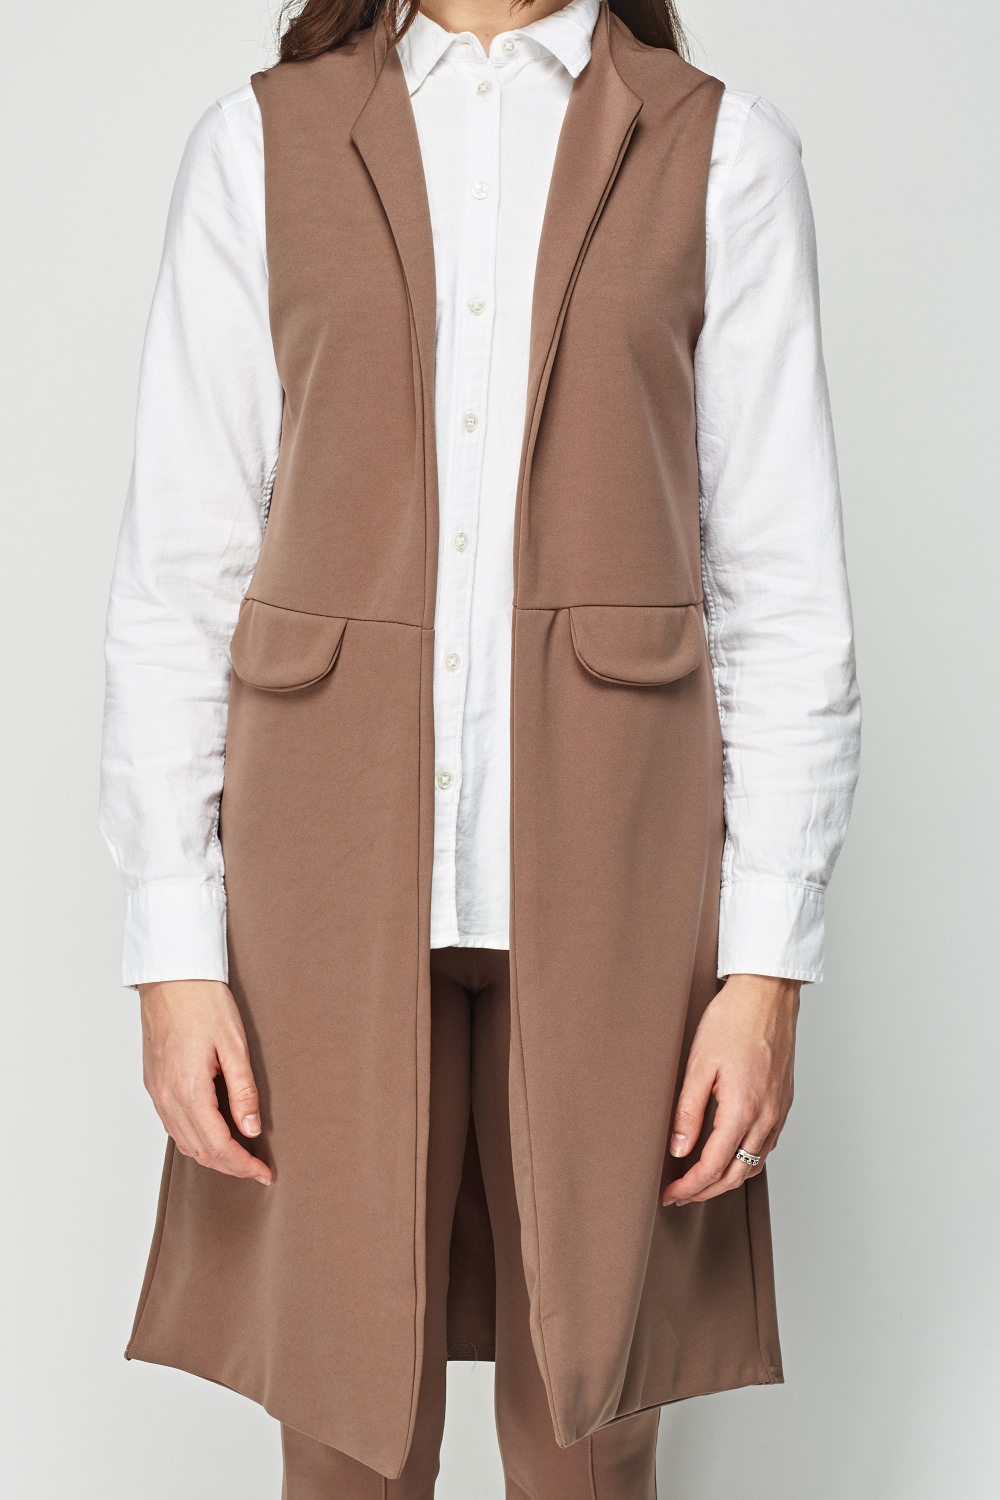 Middle Brown Open Front Gilet - Just $7